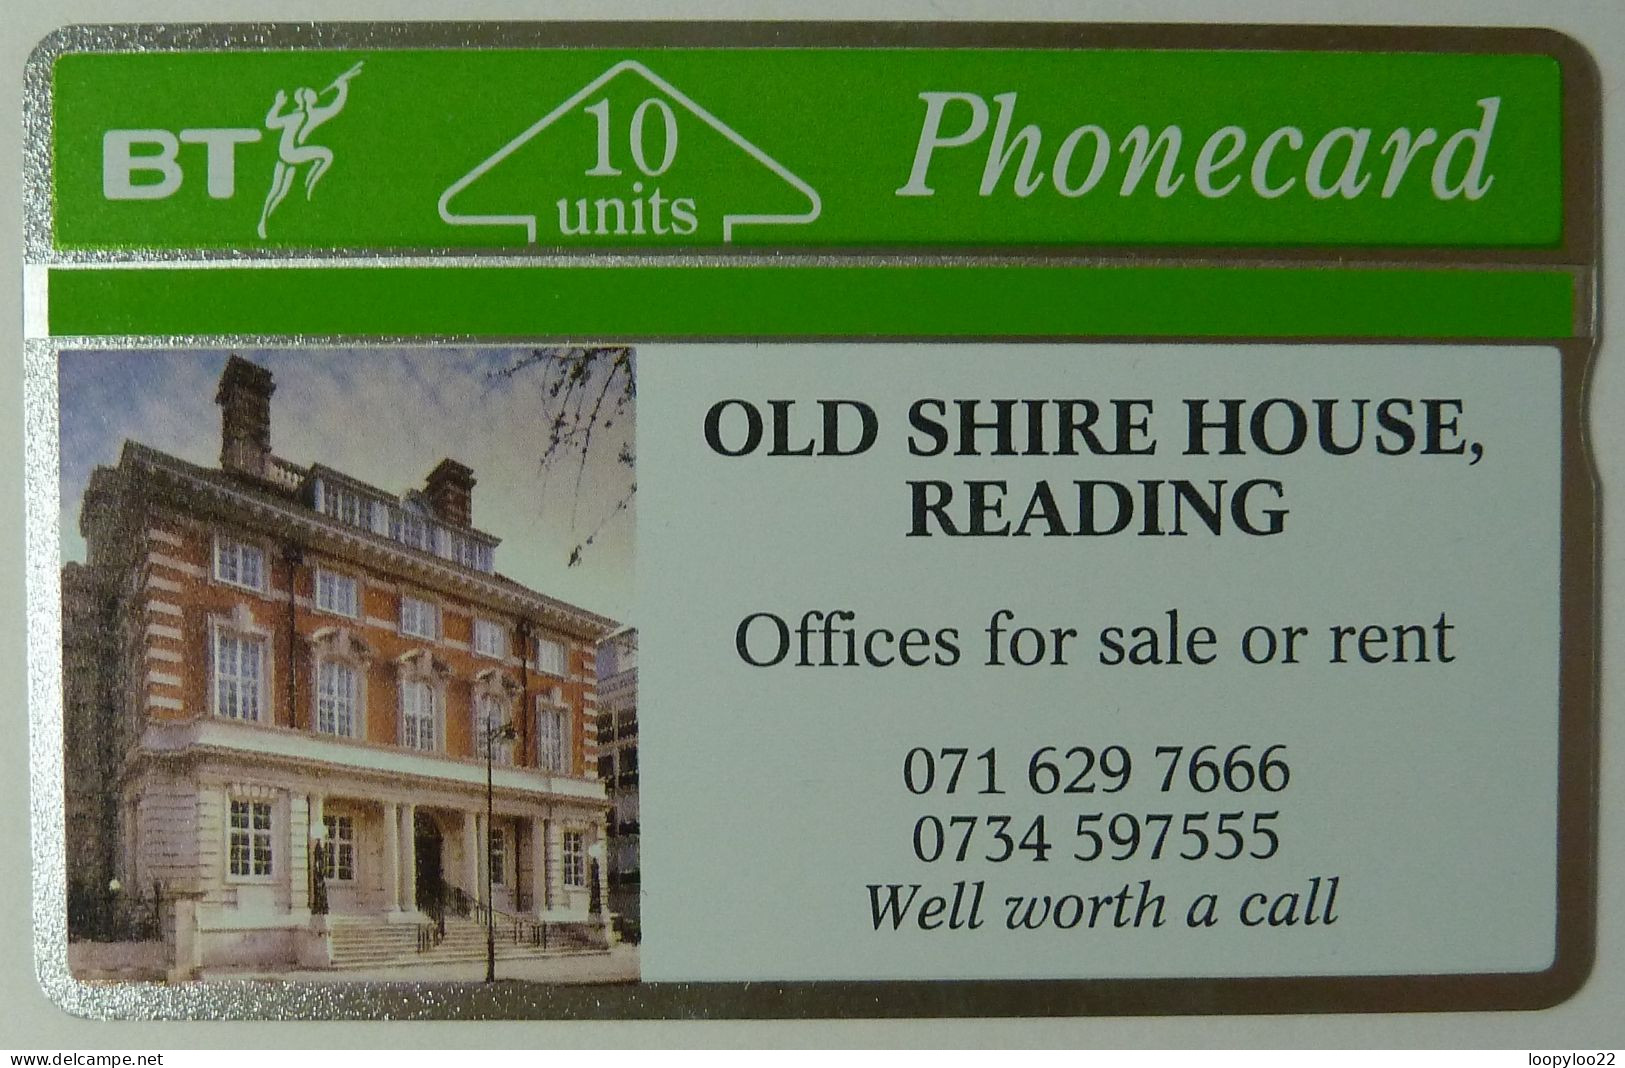 UK - Great Britain - BT & Landis & Gyr - BTP081 - Old Shire House, Reading - 243C - 5450ex - Mint - BT Private Issues